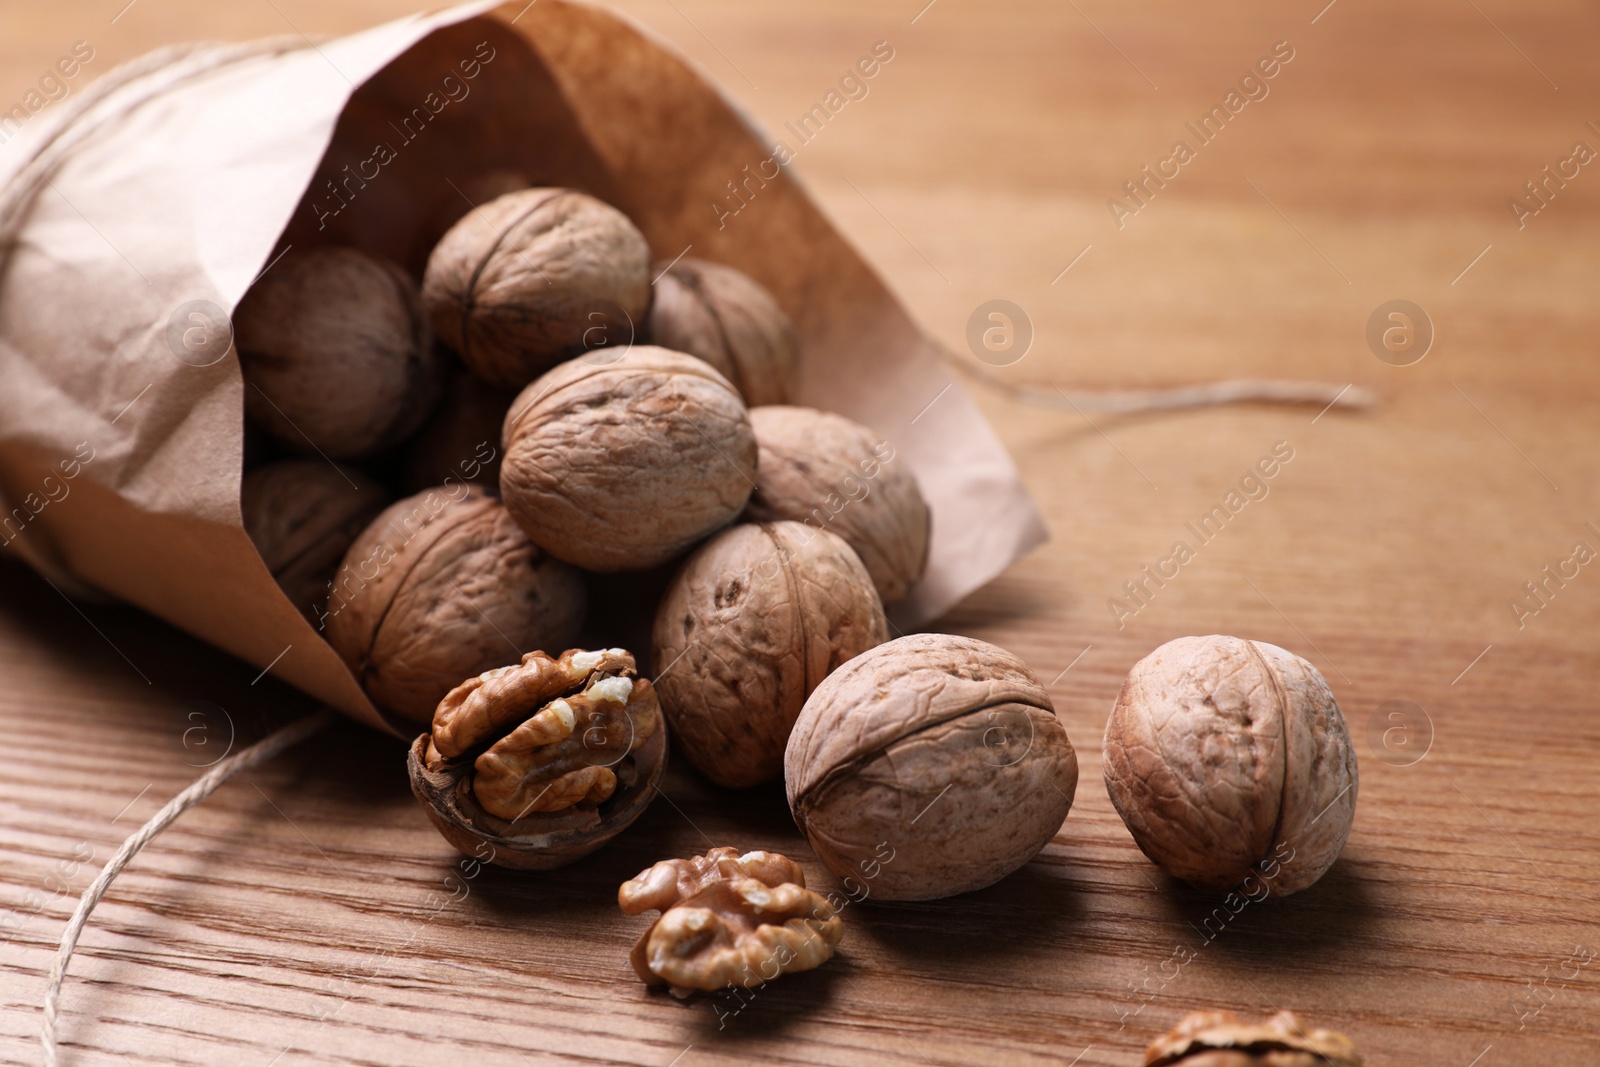 Photo of Tasty walnuts on wooden table, closeup view